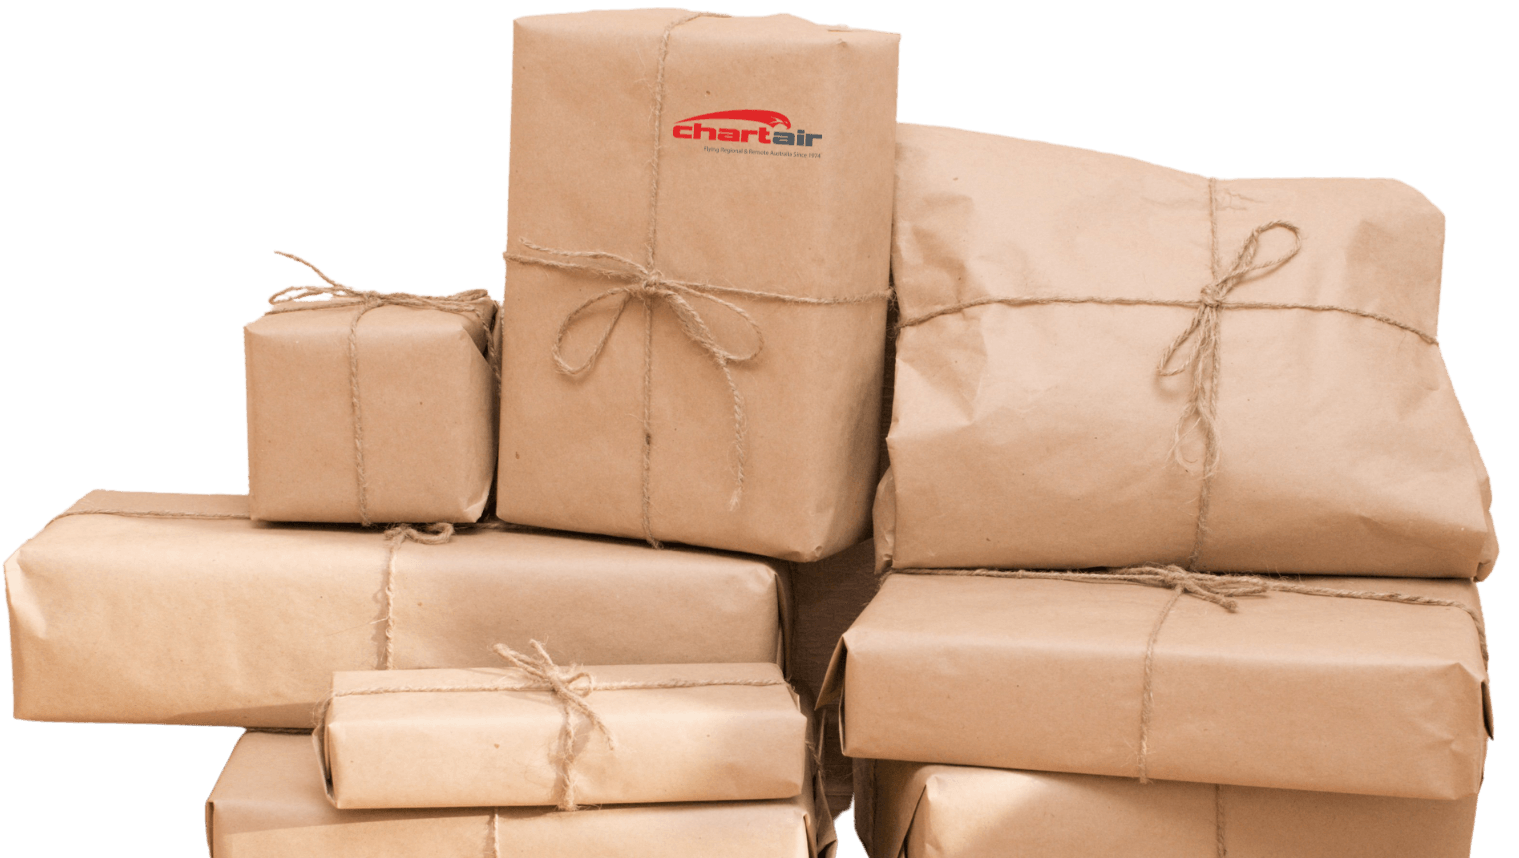 Freight and parcels covered in craft paper with Chartair logo